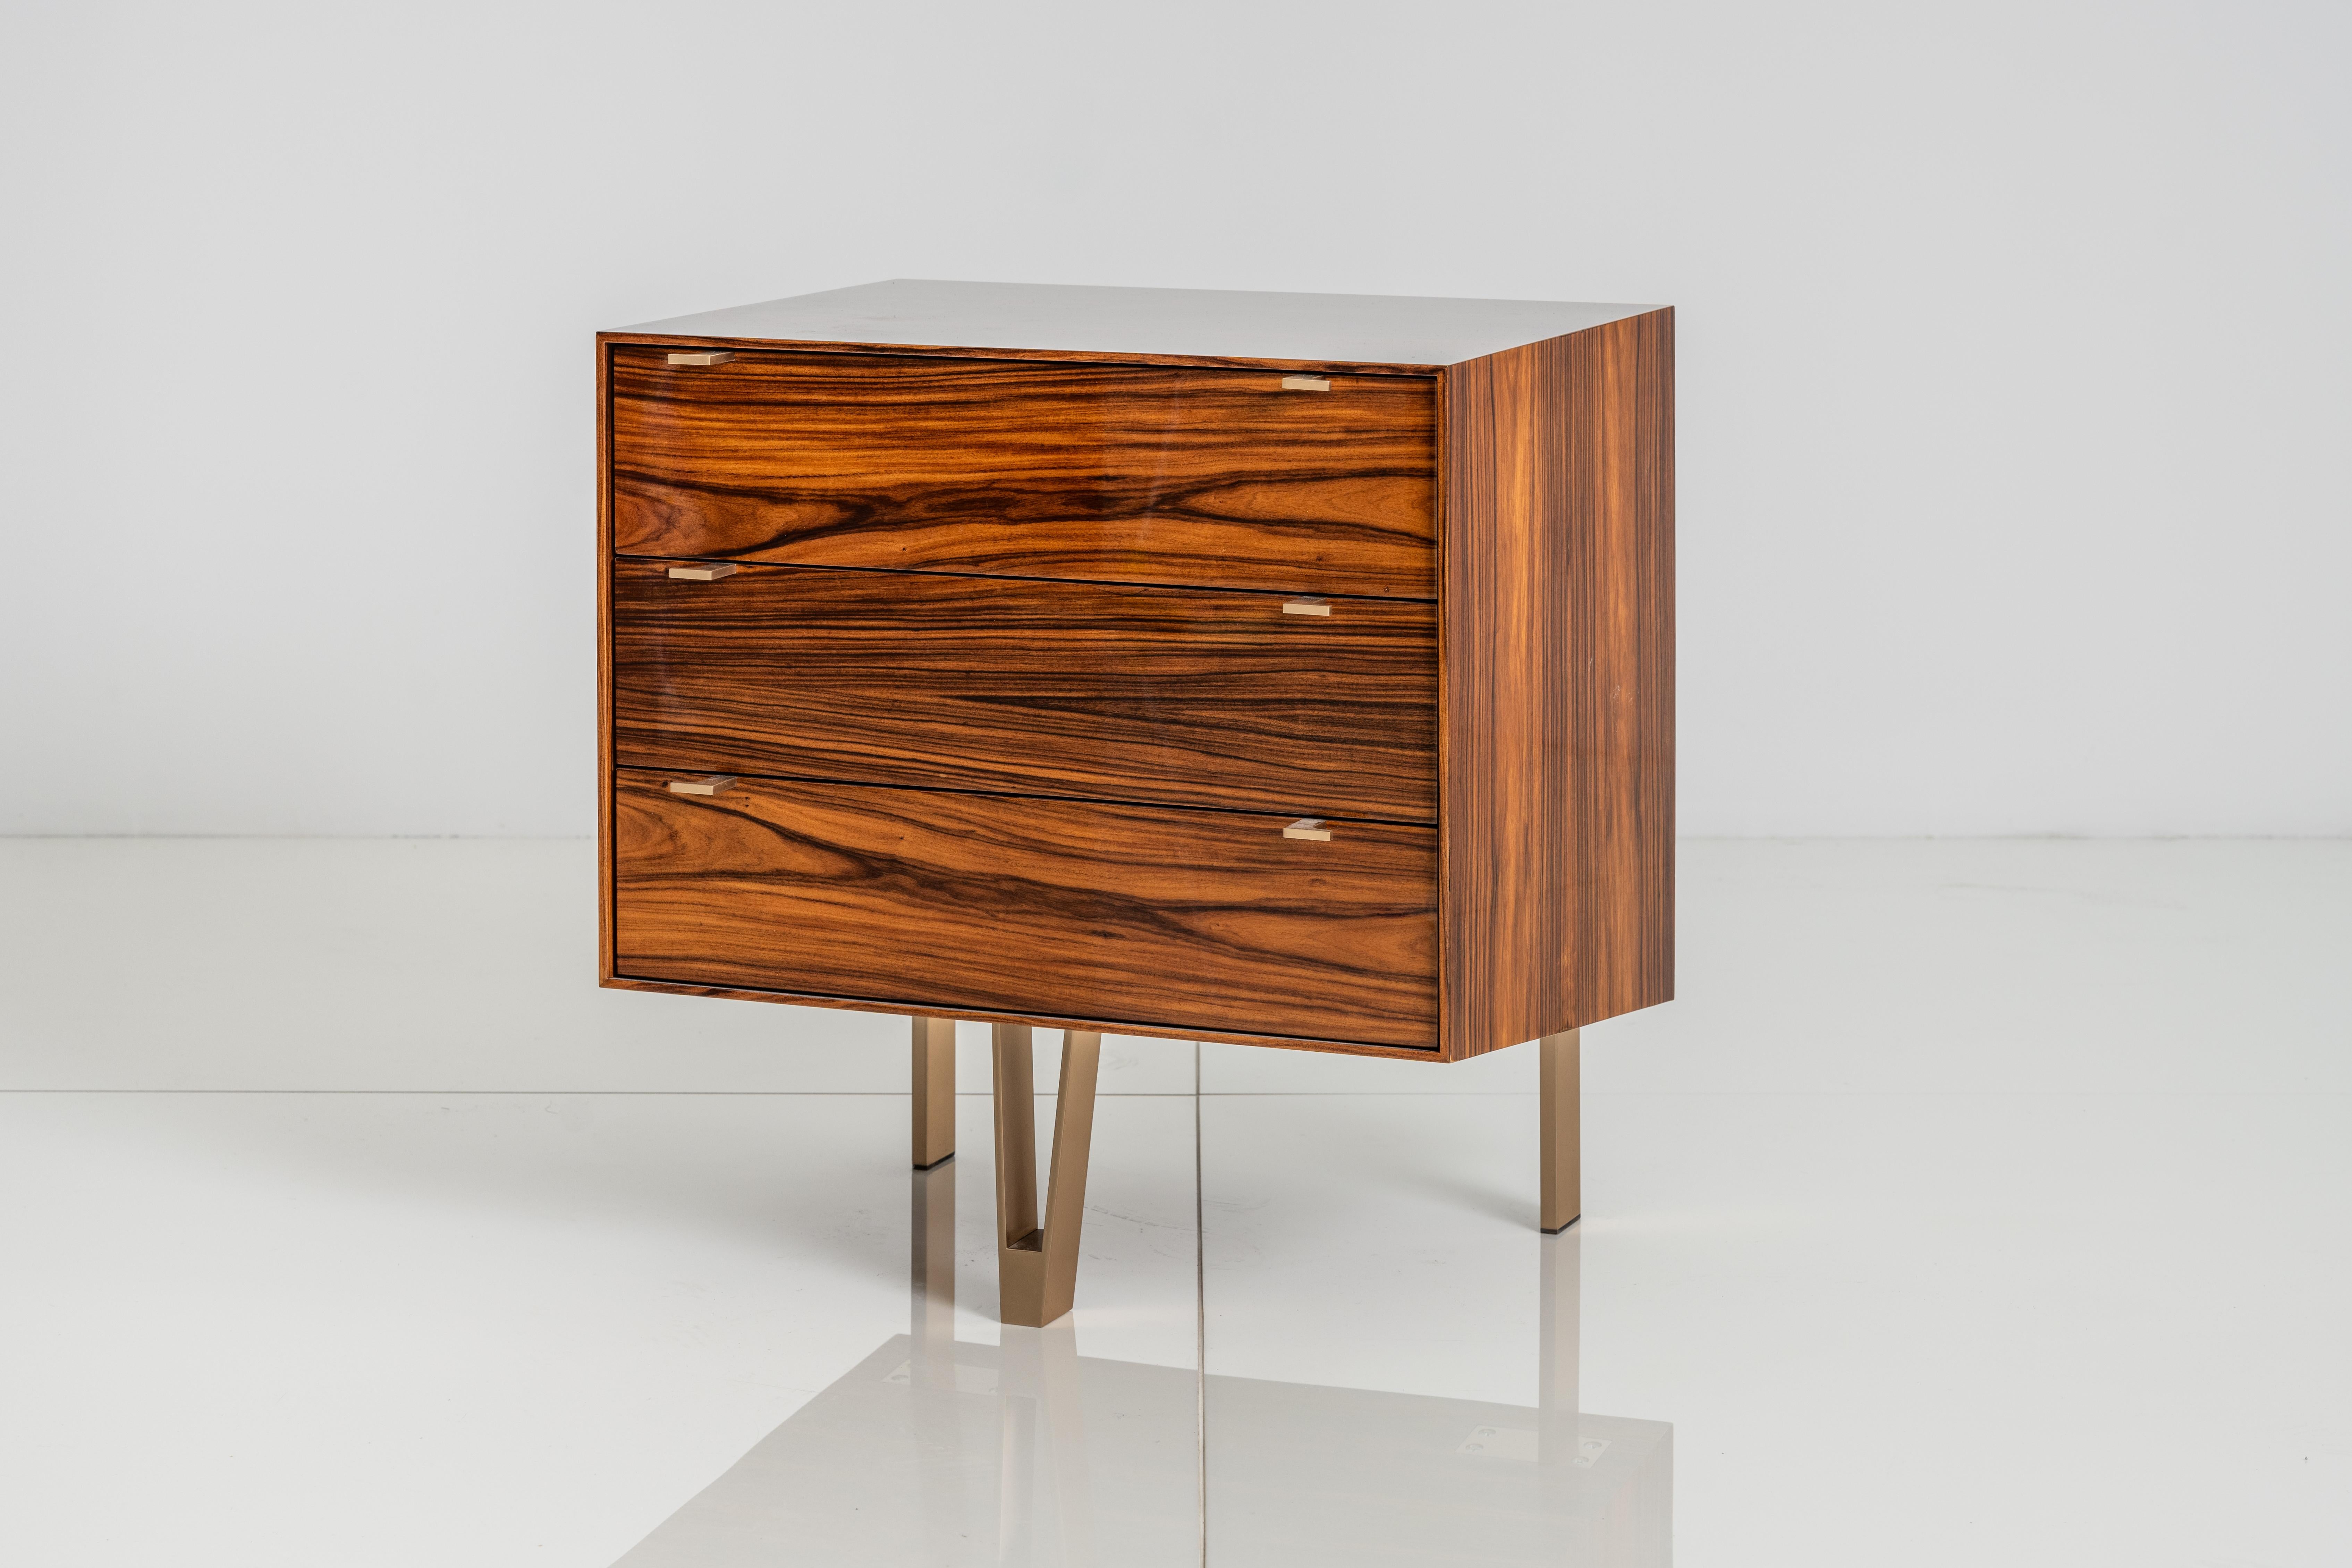 The Saxton End Cabinet features a glossy wood frame along with a canted body lending it a visual lightness. Like all KGBL pieces this item is finished on all sides. 

This is a natural product that may have slight imperfections. This is the beauty